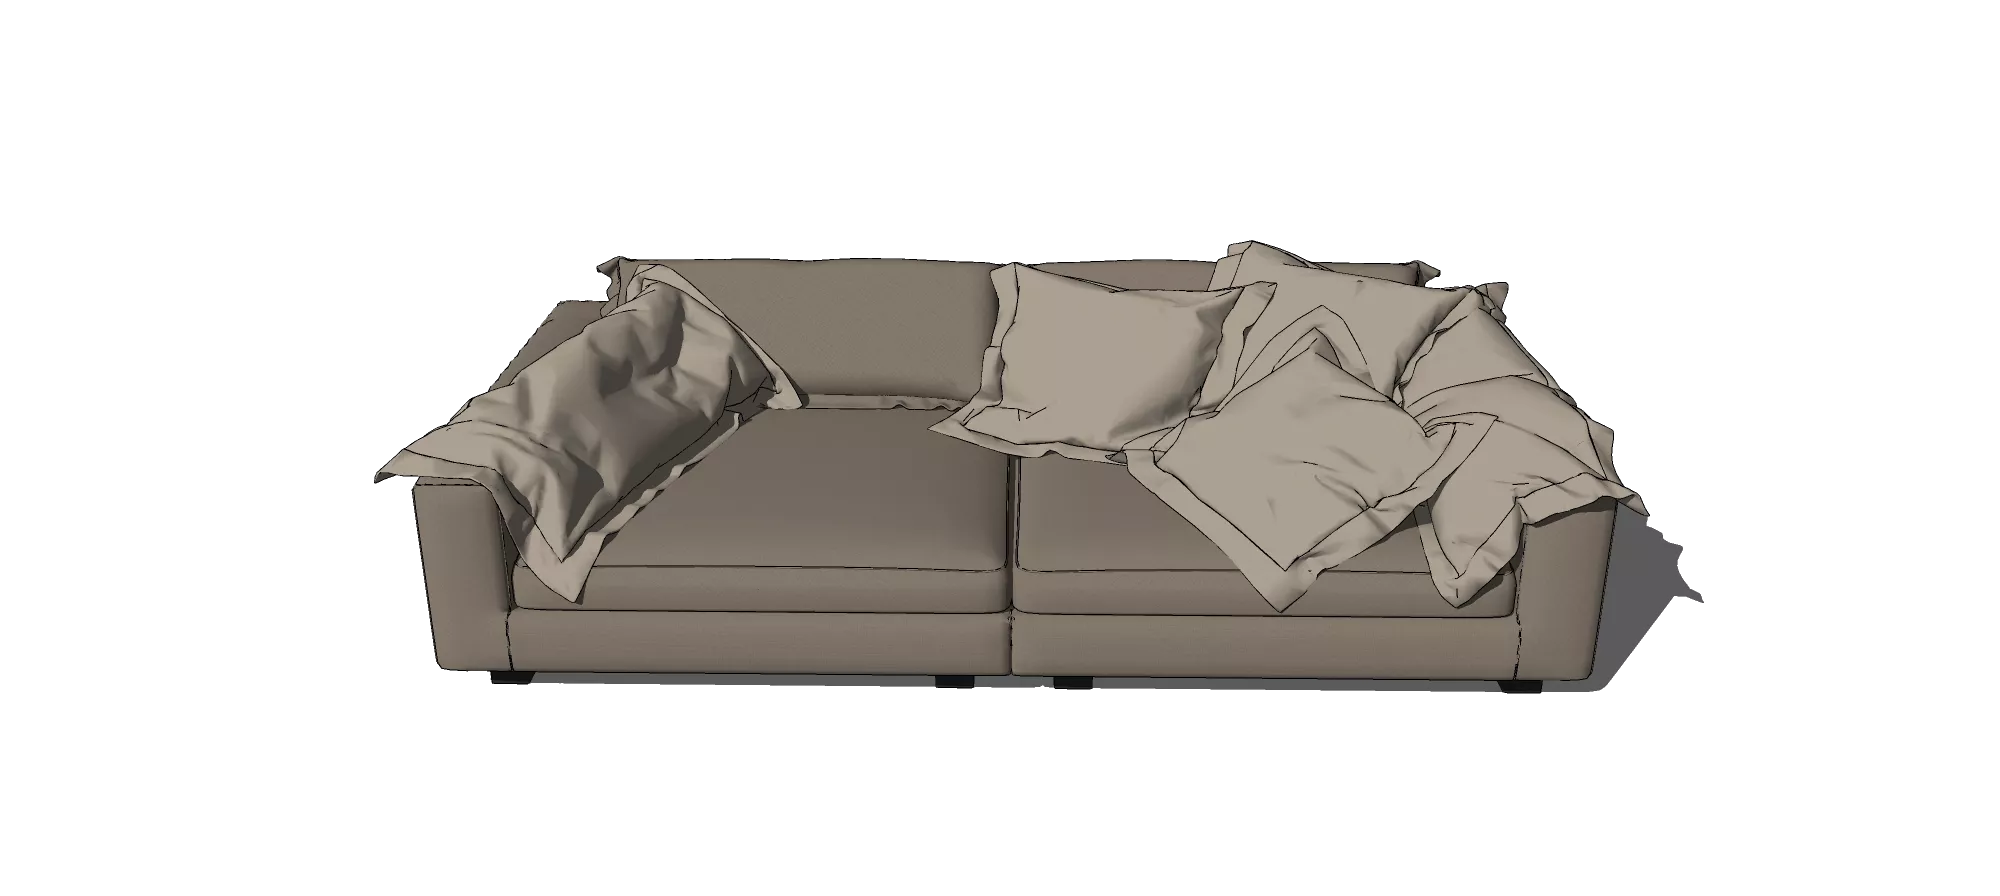 MODERN SOFA - SKETCHUP 3D MODEL - VRAY OR ENSCAPE - ID13115